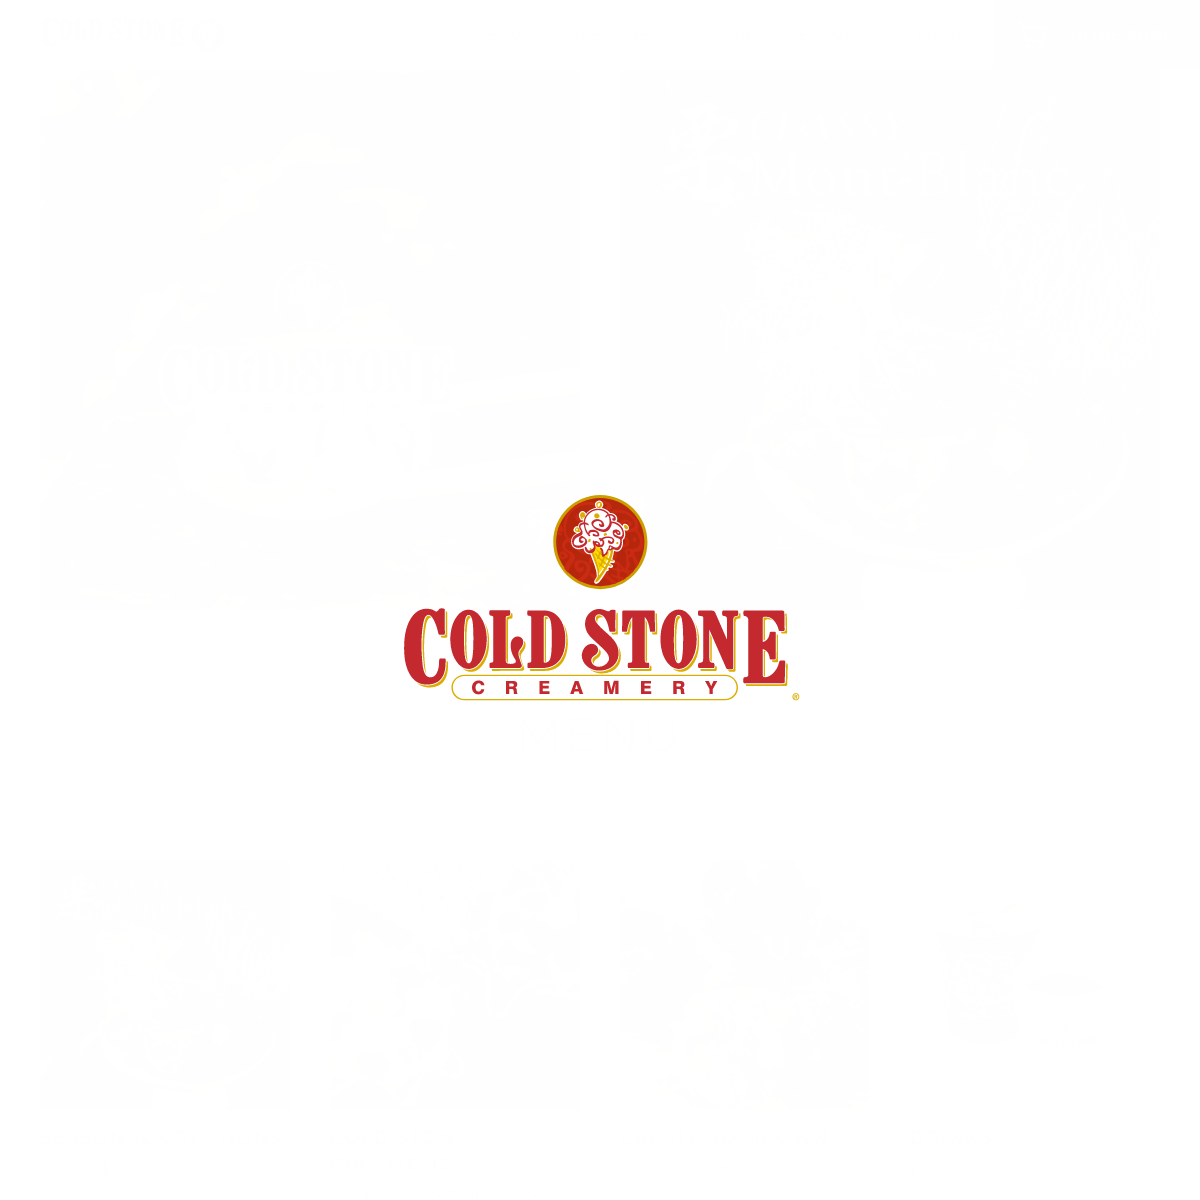 A complete backup of coldstonecreamery.co.jp